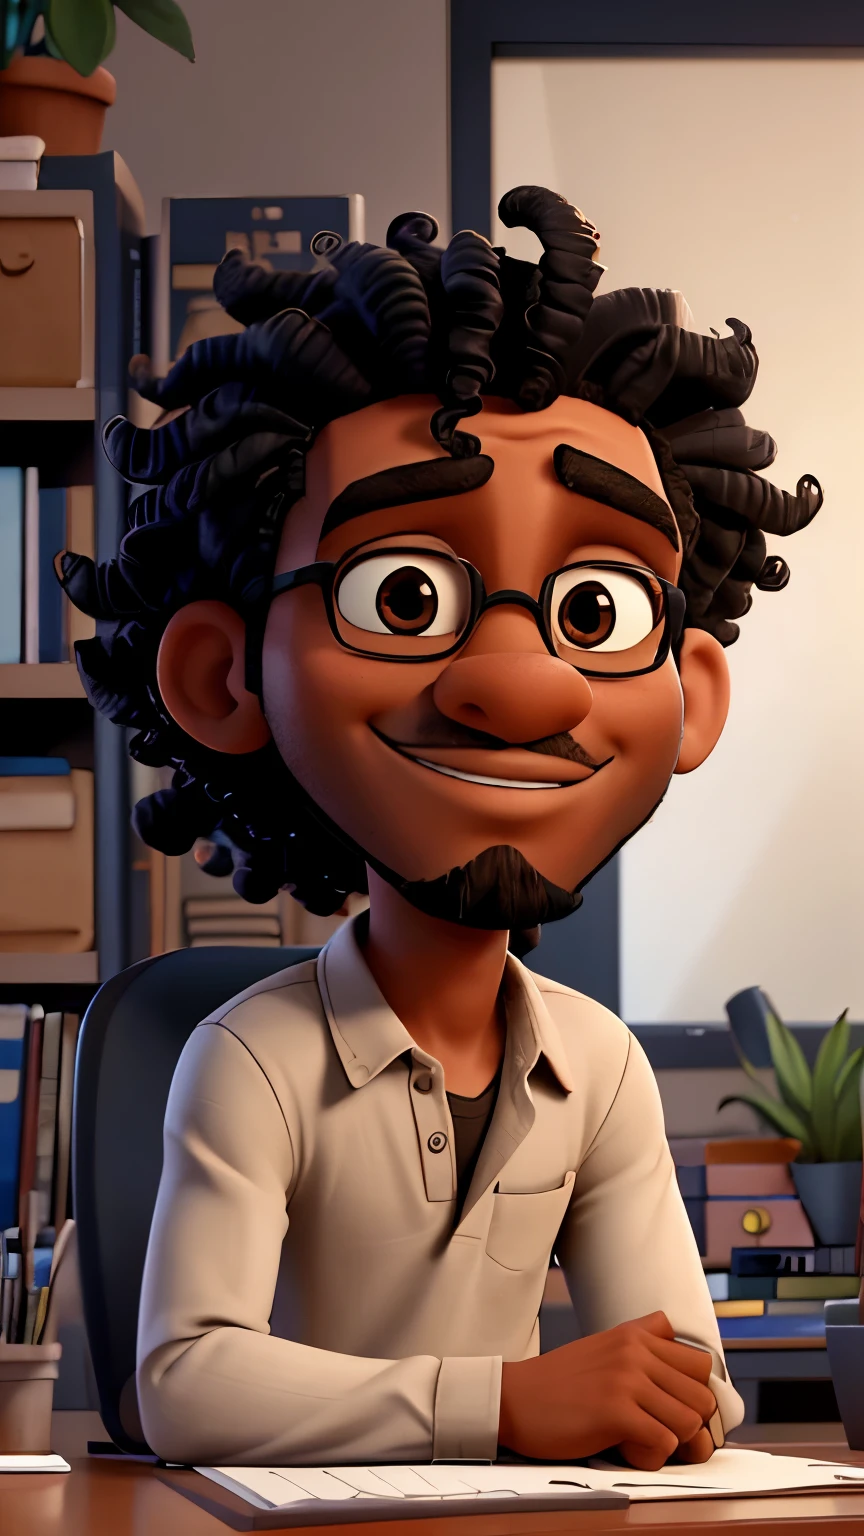 render of a black man with bearded pointy chin, small ears, squinty almond shaped eyes, high cheekbones, wavy curly hair, wearing a casual shirt, sitting at a desk in a modern office with a laptop with soft warm lighting and plants and bookcases in the background in the style of disney pixar